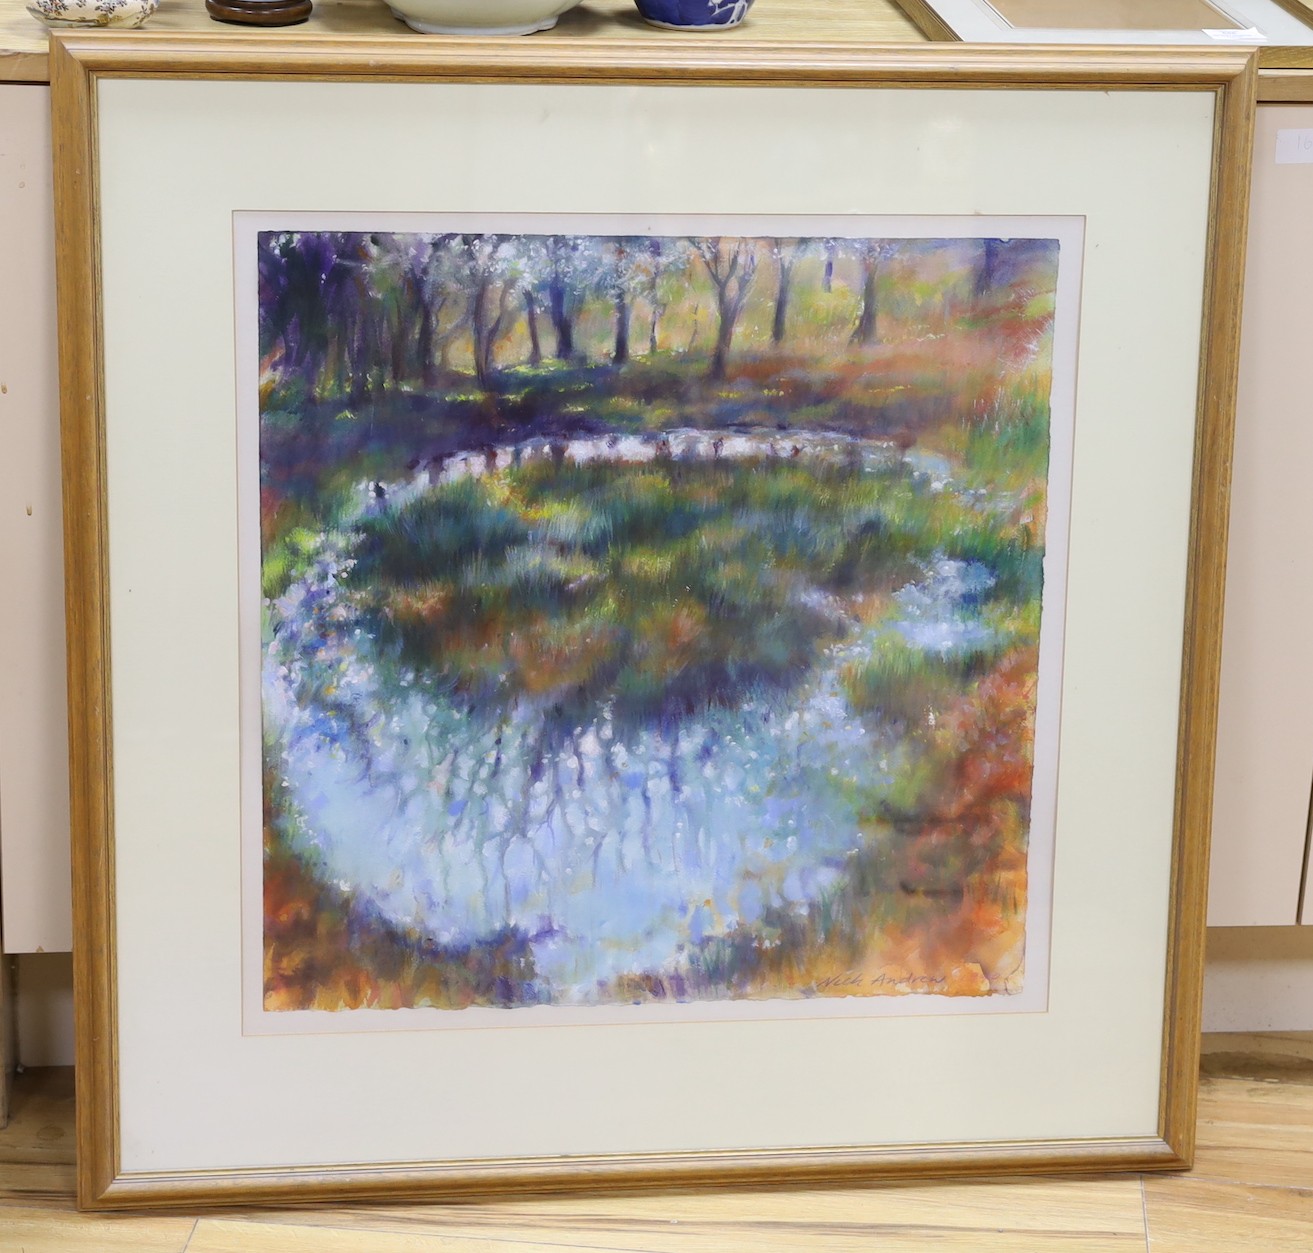 Nick Andrew (b.1957), acrylic on paper, 'Moon Pond', signed, with Unicorn Gallery label verso and dated 1990, 56 x 56cm